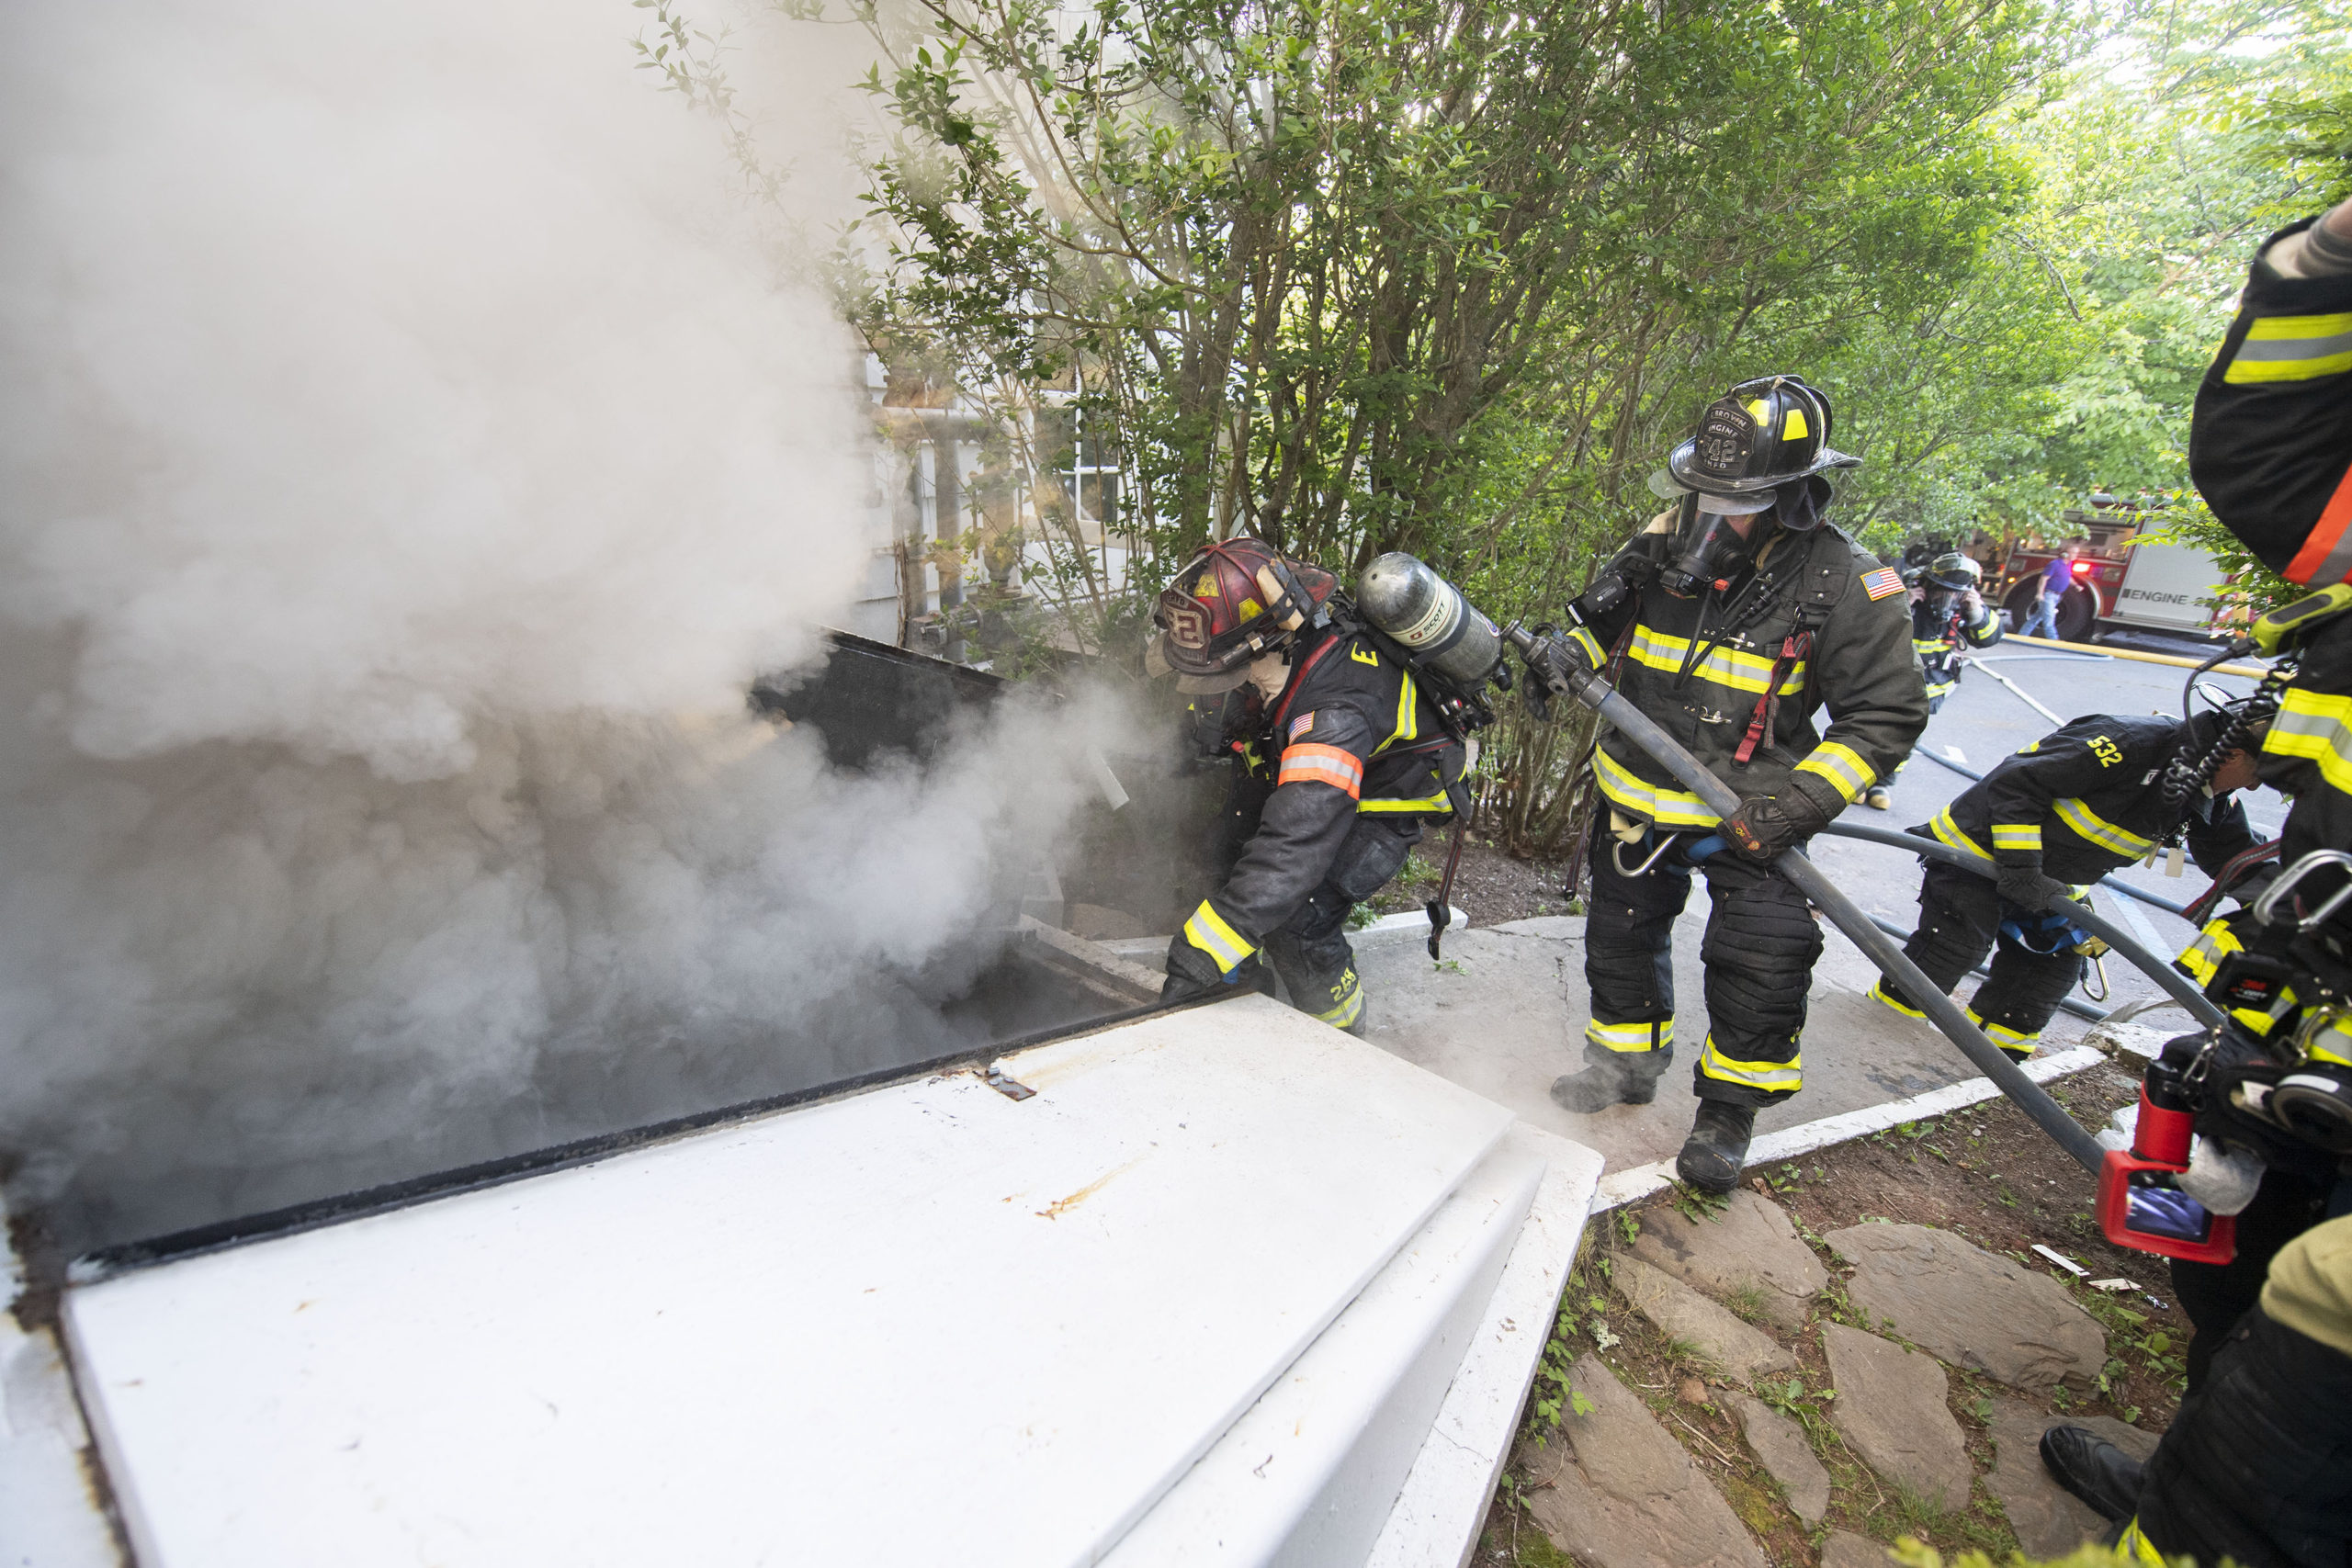 Firefighters battled a fire in the basement of Moby's restaurant in East Hampton on Friday morning.